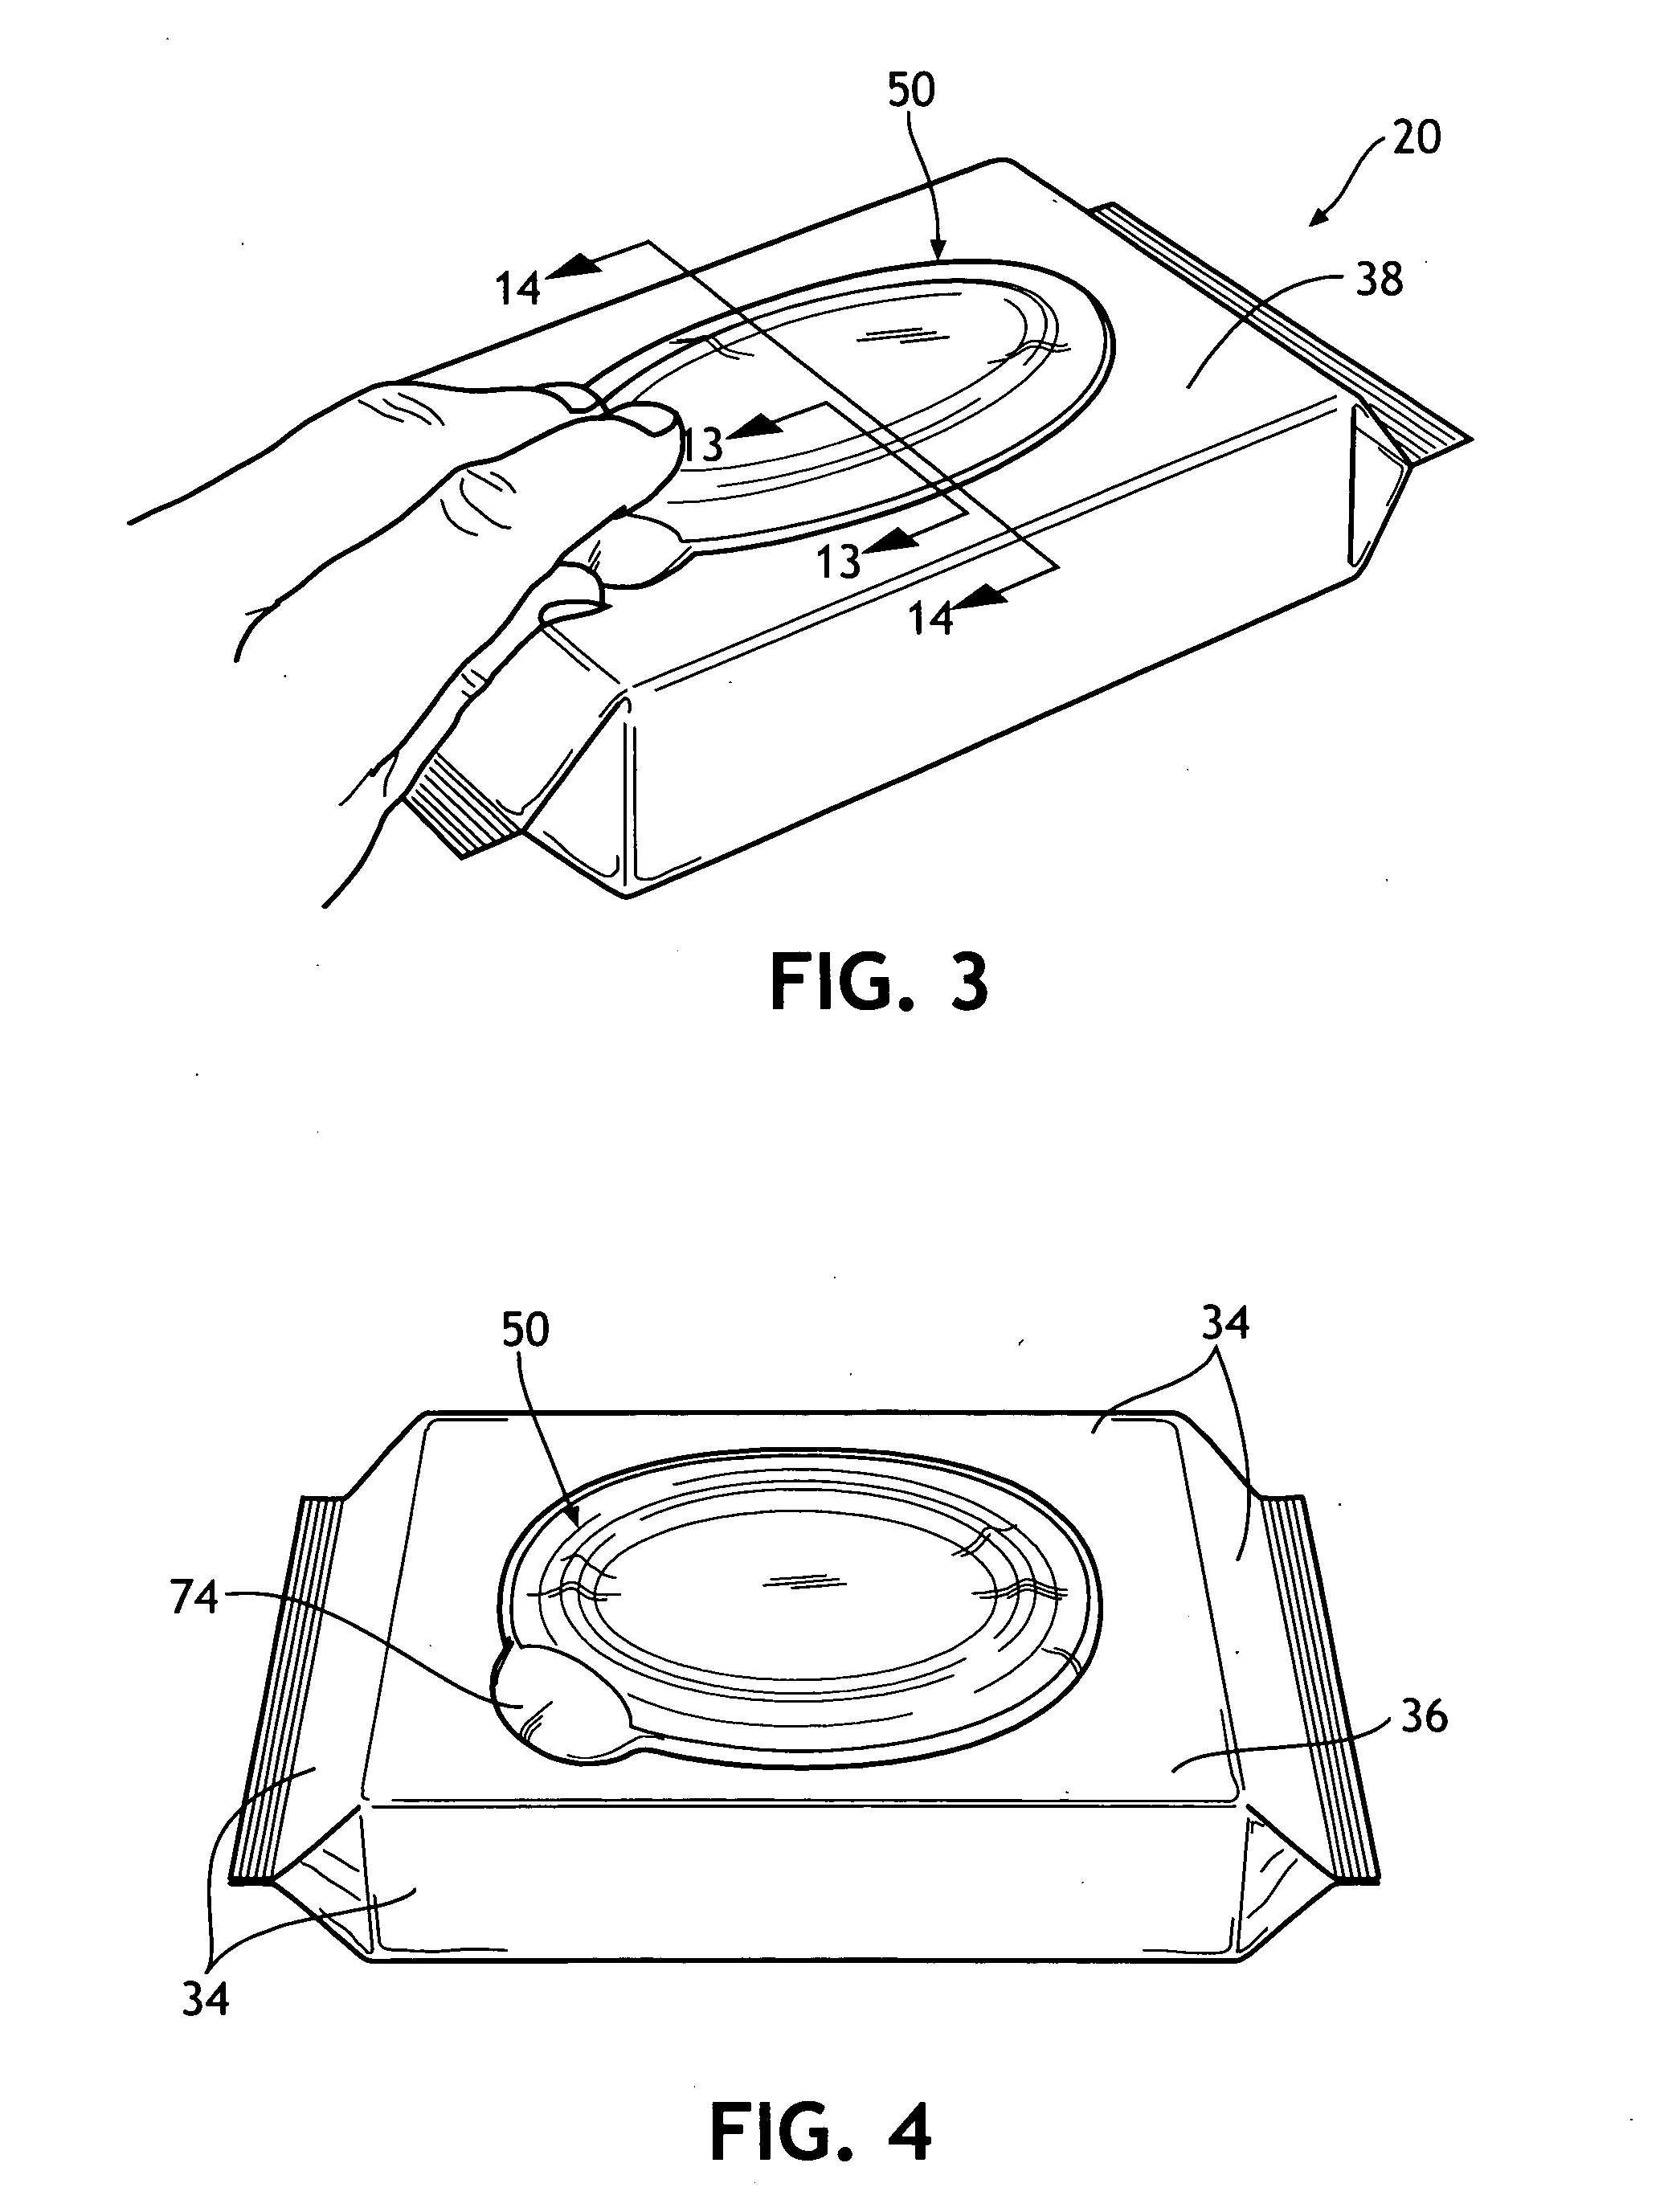 Storing and dispensing container for product